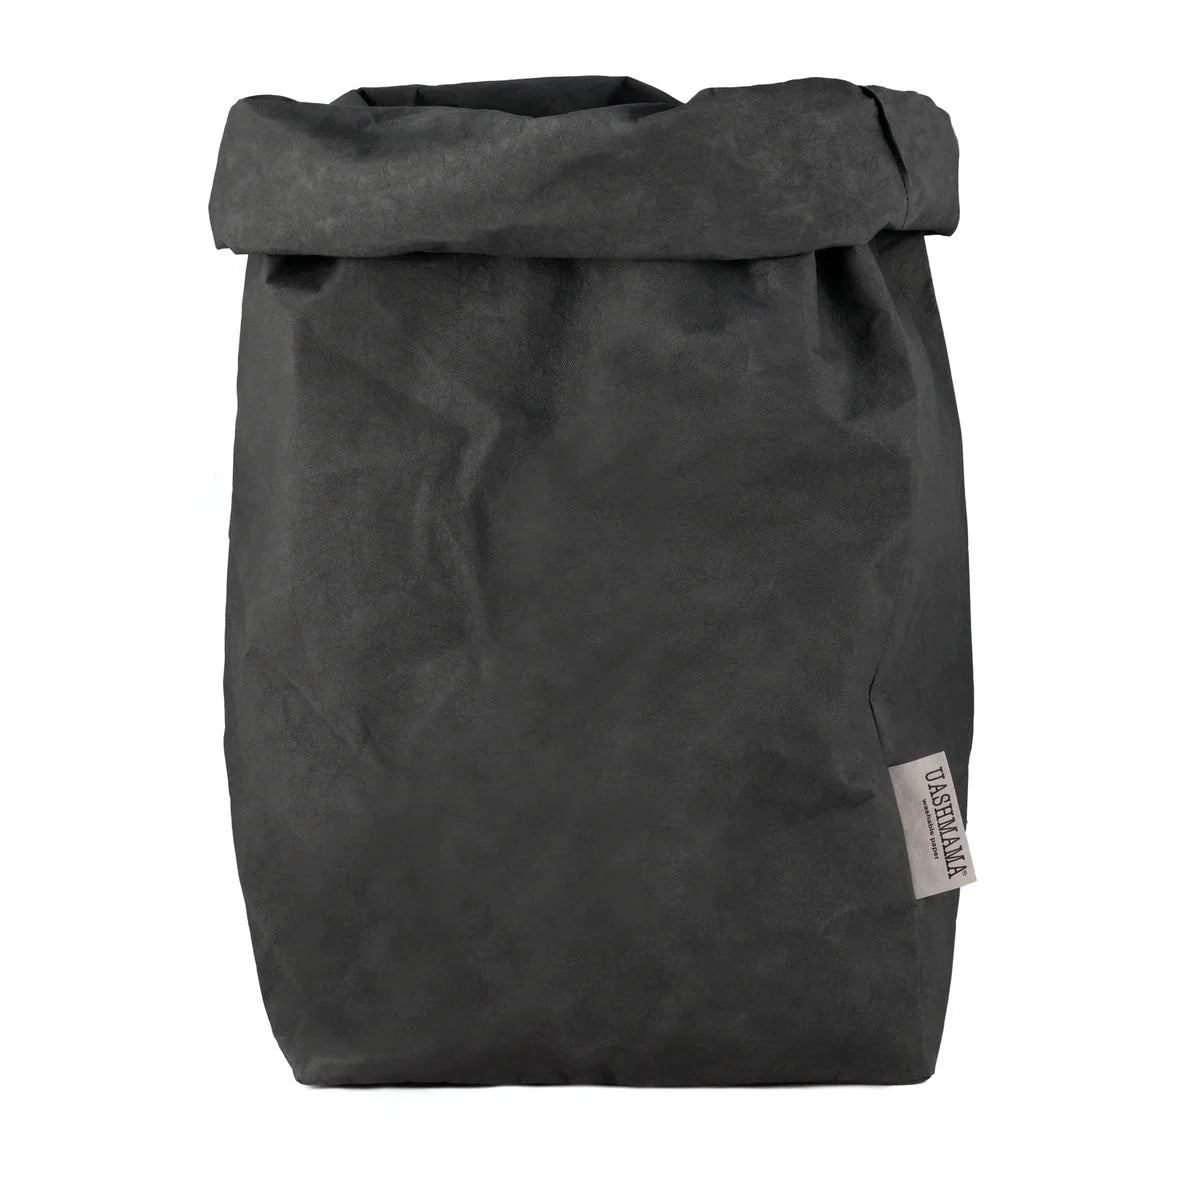 A washable paper bag is shown. The bag is rolled down at the top and features a UASHMAMA logo label on the bottom left corner. The bag pictured is the extra extra large size in dark grey.